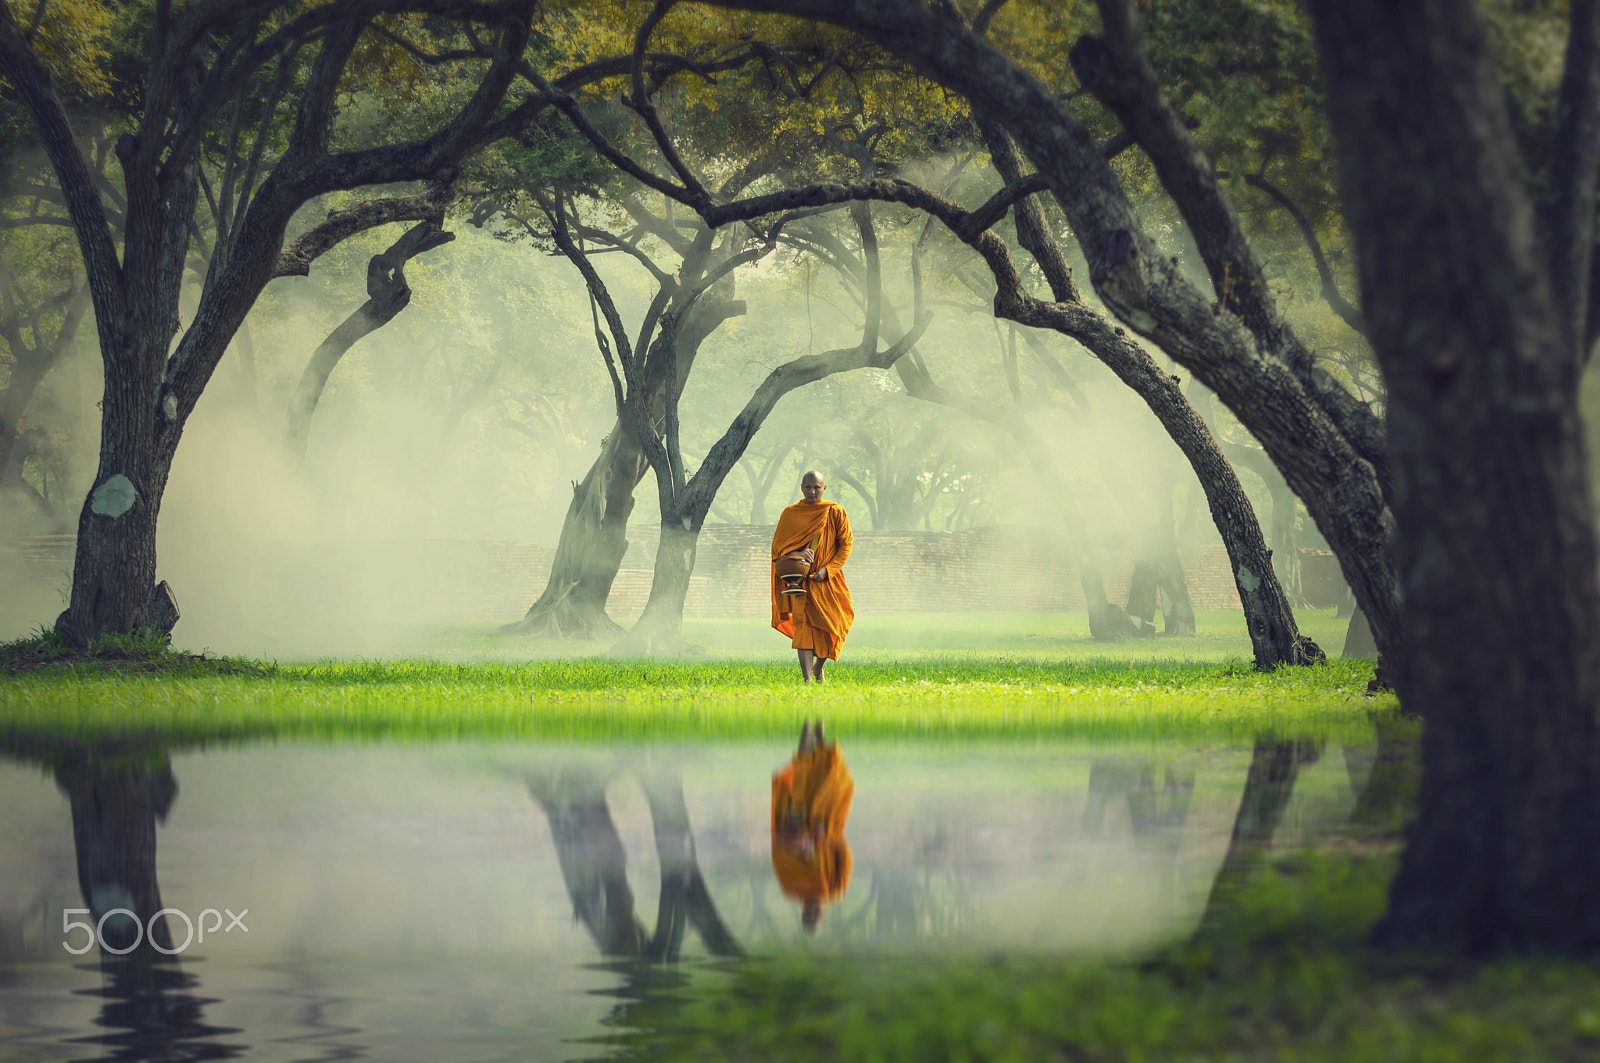 Pentax K-3 II sample photo. Monk hike in deep forest reflection with lake, buddha religion c photography